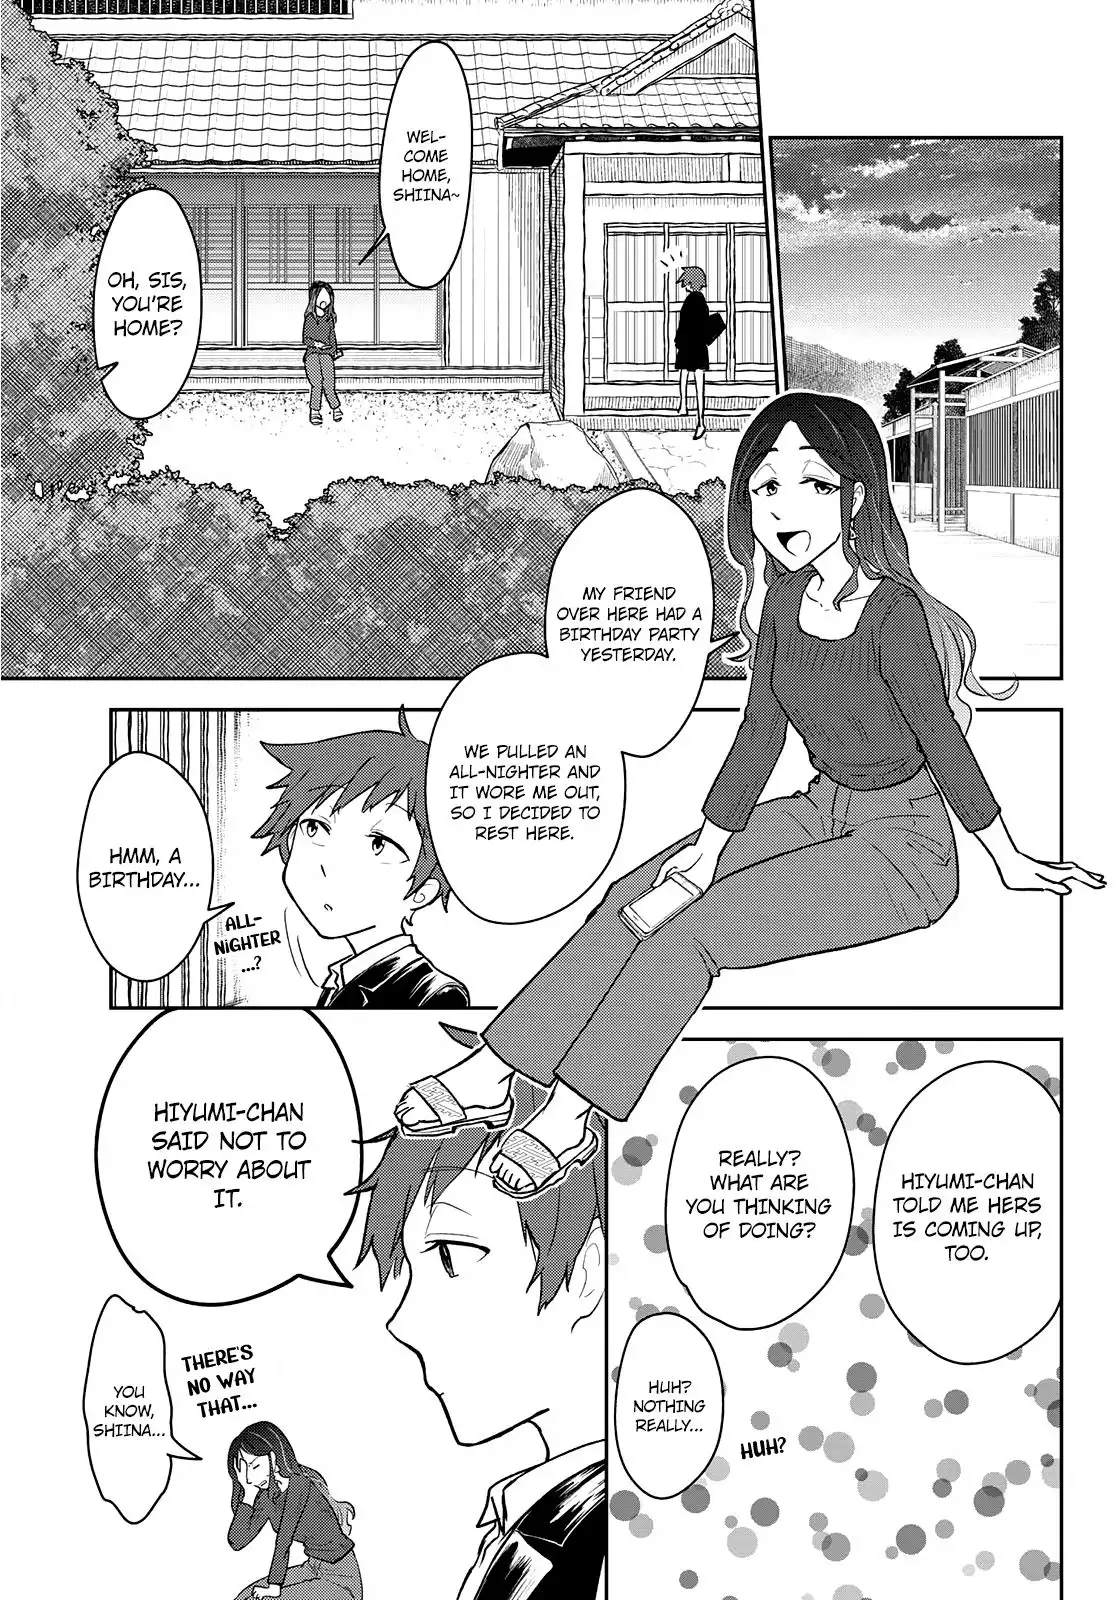 Hiyumi's Country Road Chapter 12